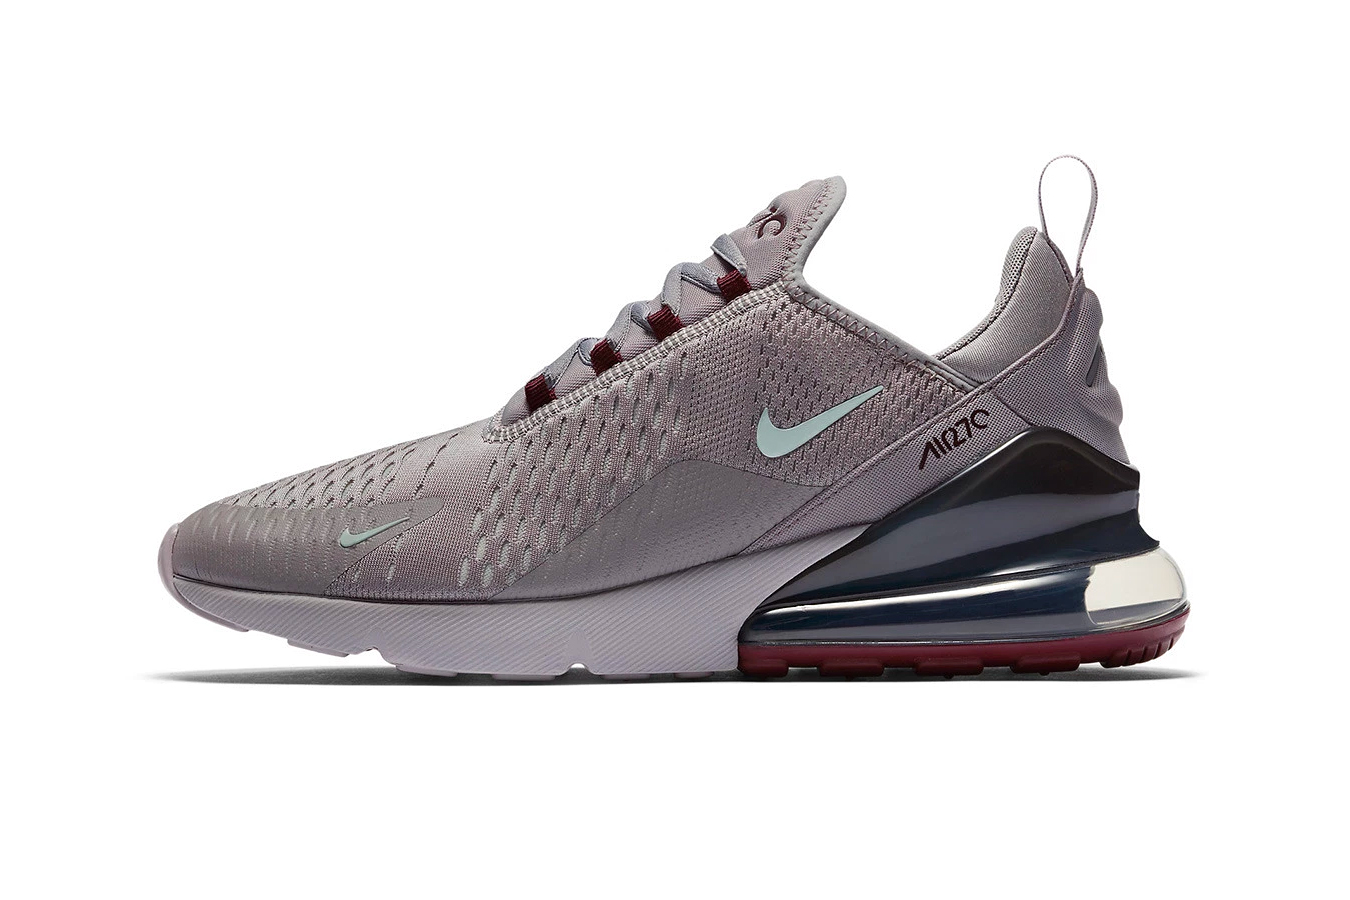 Nike Air Max 270 Burgundy Crush Release Date availability grey silver blue sneakers trainers drop cop how to buy